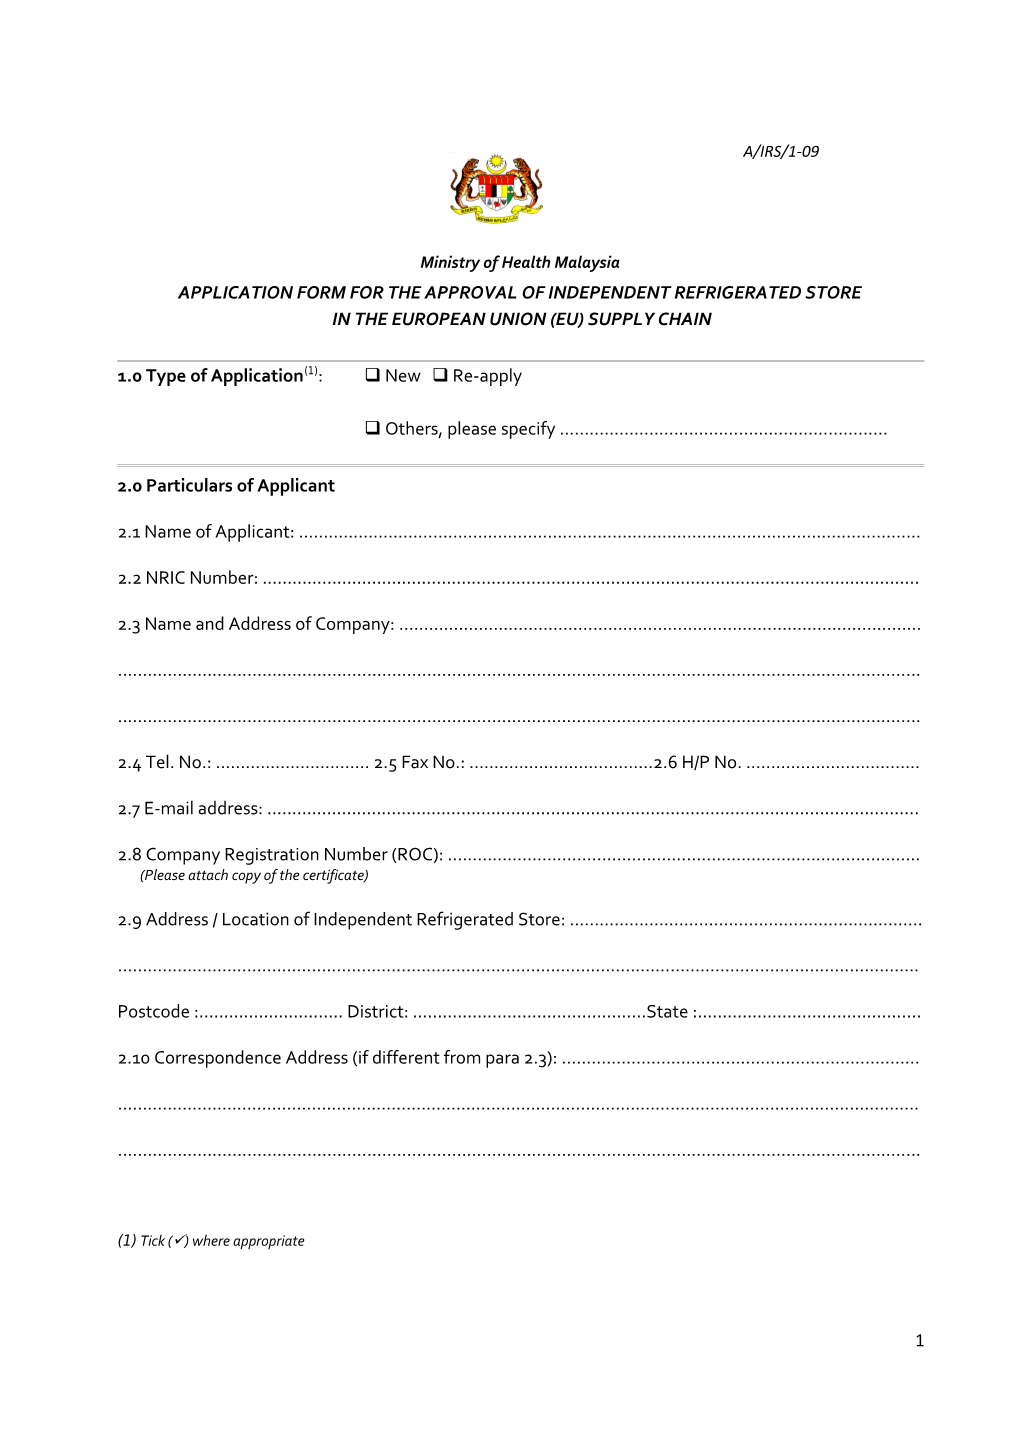 Application Form for the Approval of Independent Refrigerated Store